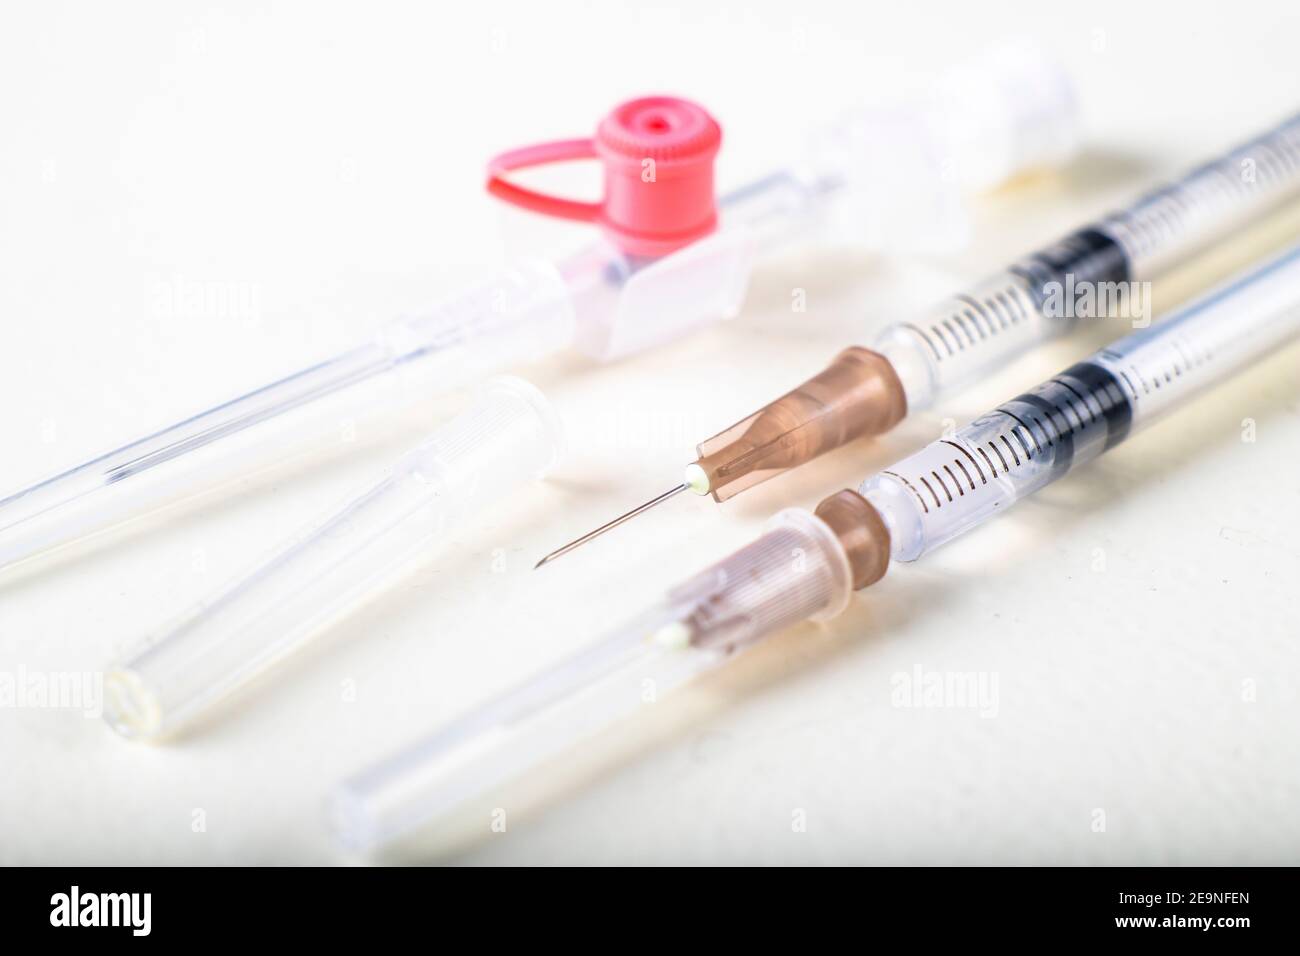 Medical syringes and cannula. Hospital treatment accessories. Light background. Stock Photo